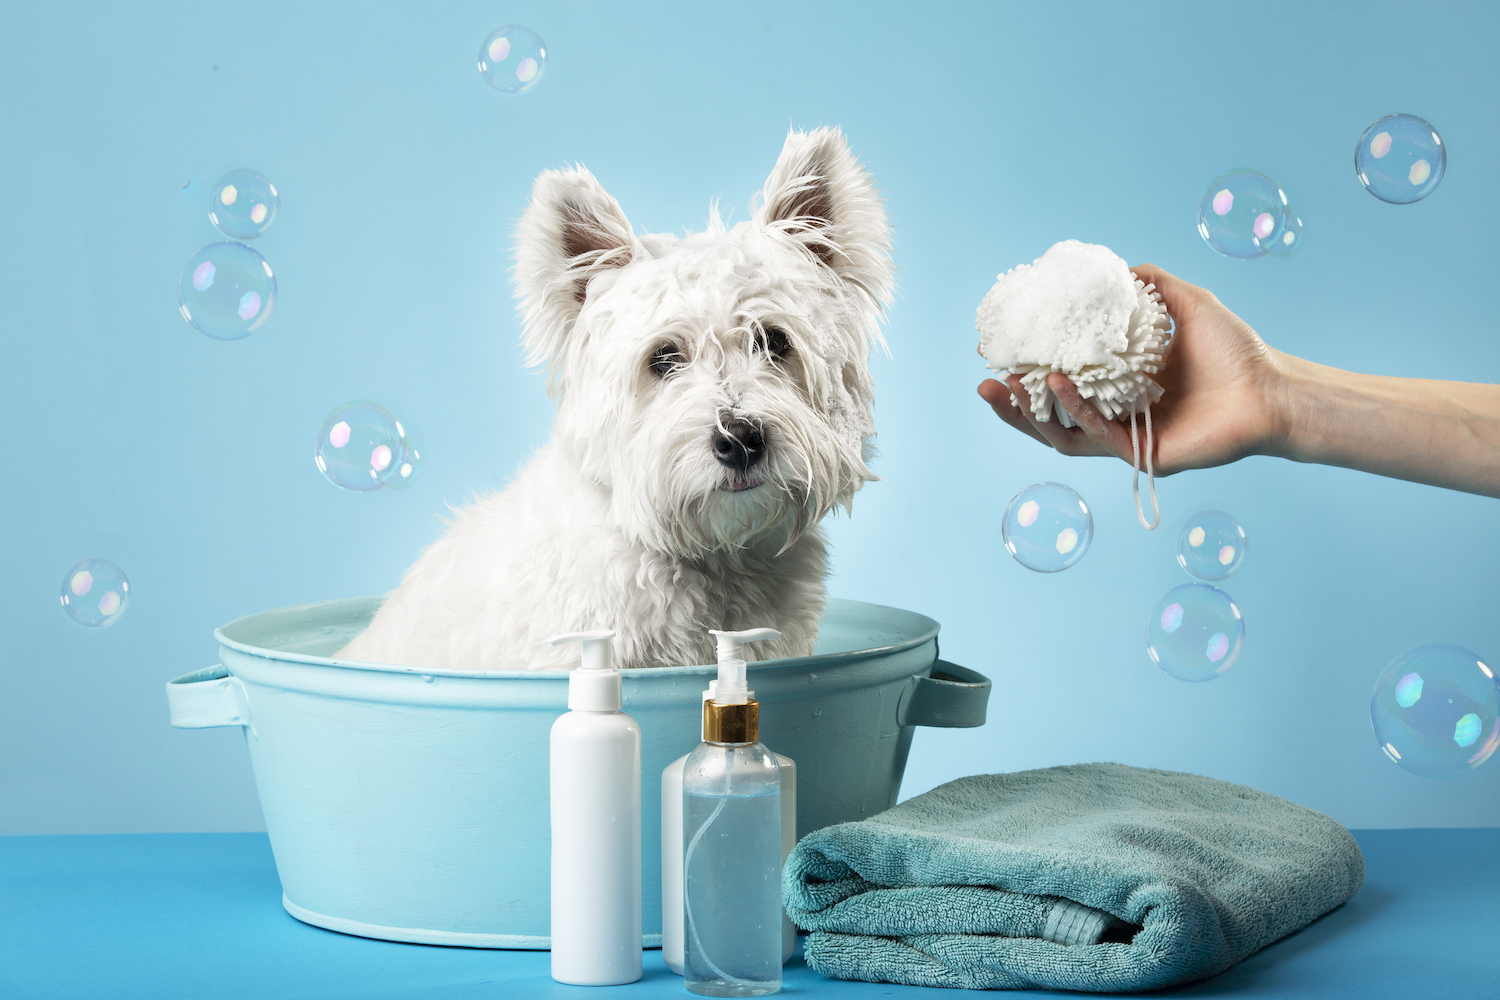 Cute West Highland White Terrier after a bath. Dog in a basin wrapped in a towel. Pet care concept. Place for text